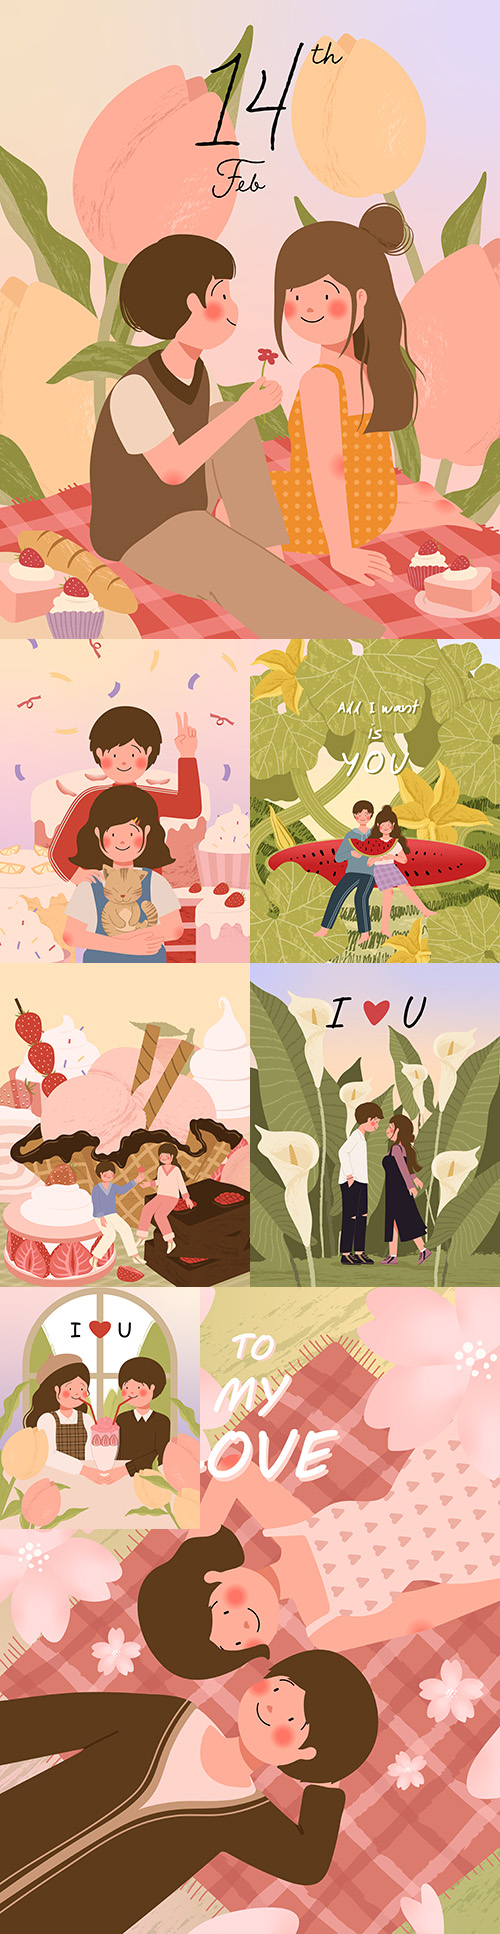 Valentine's Day with nice couple on date vector illustration
